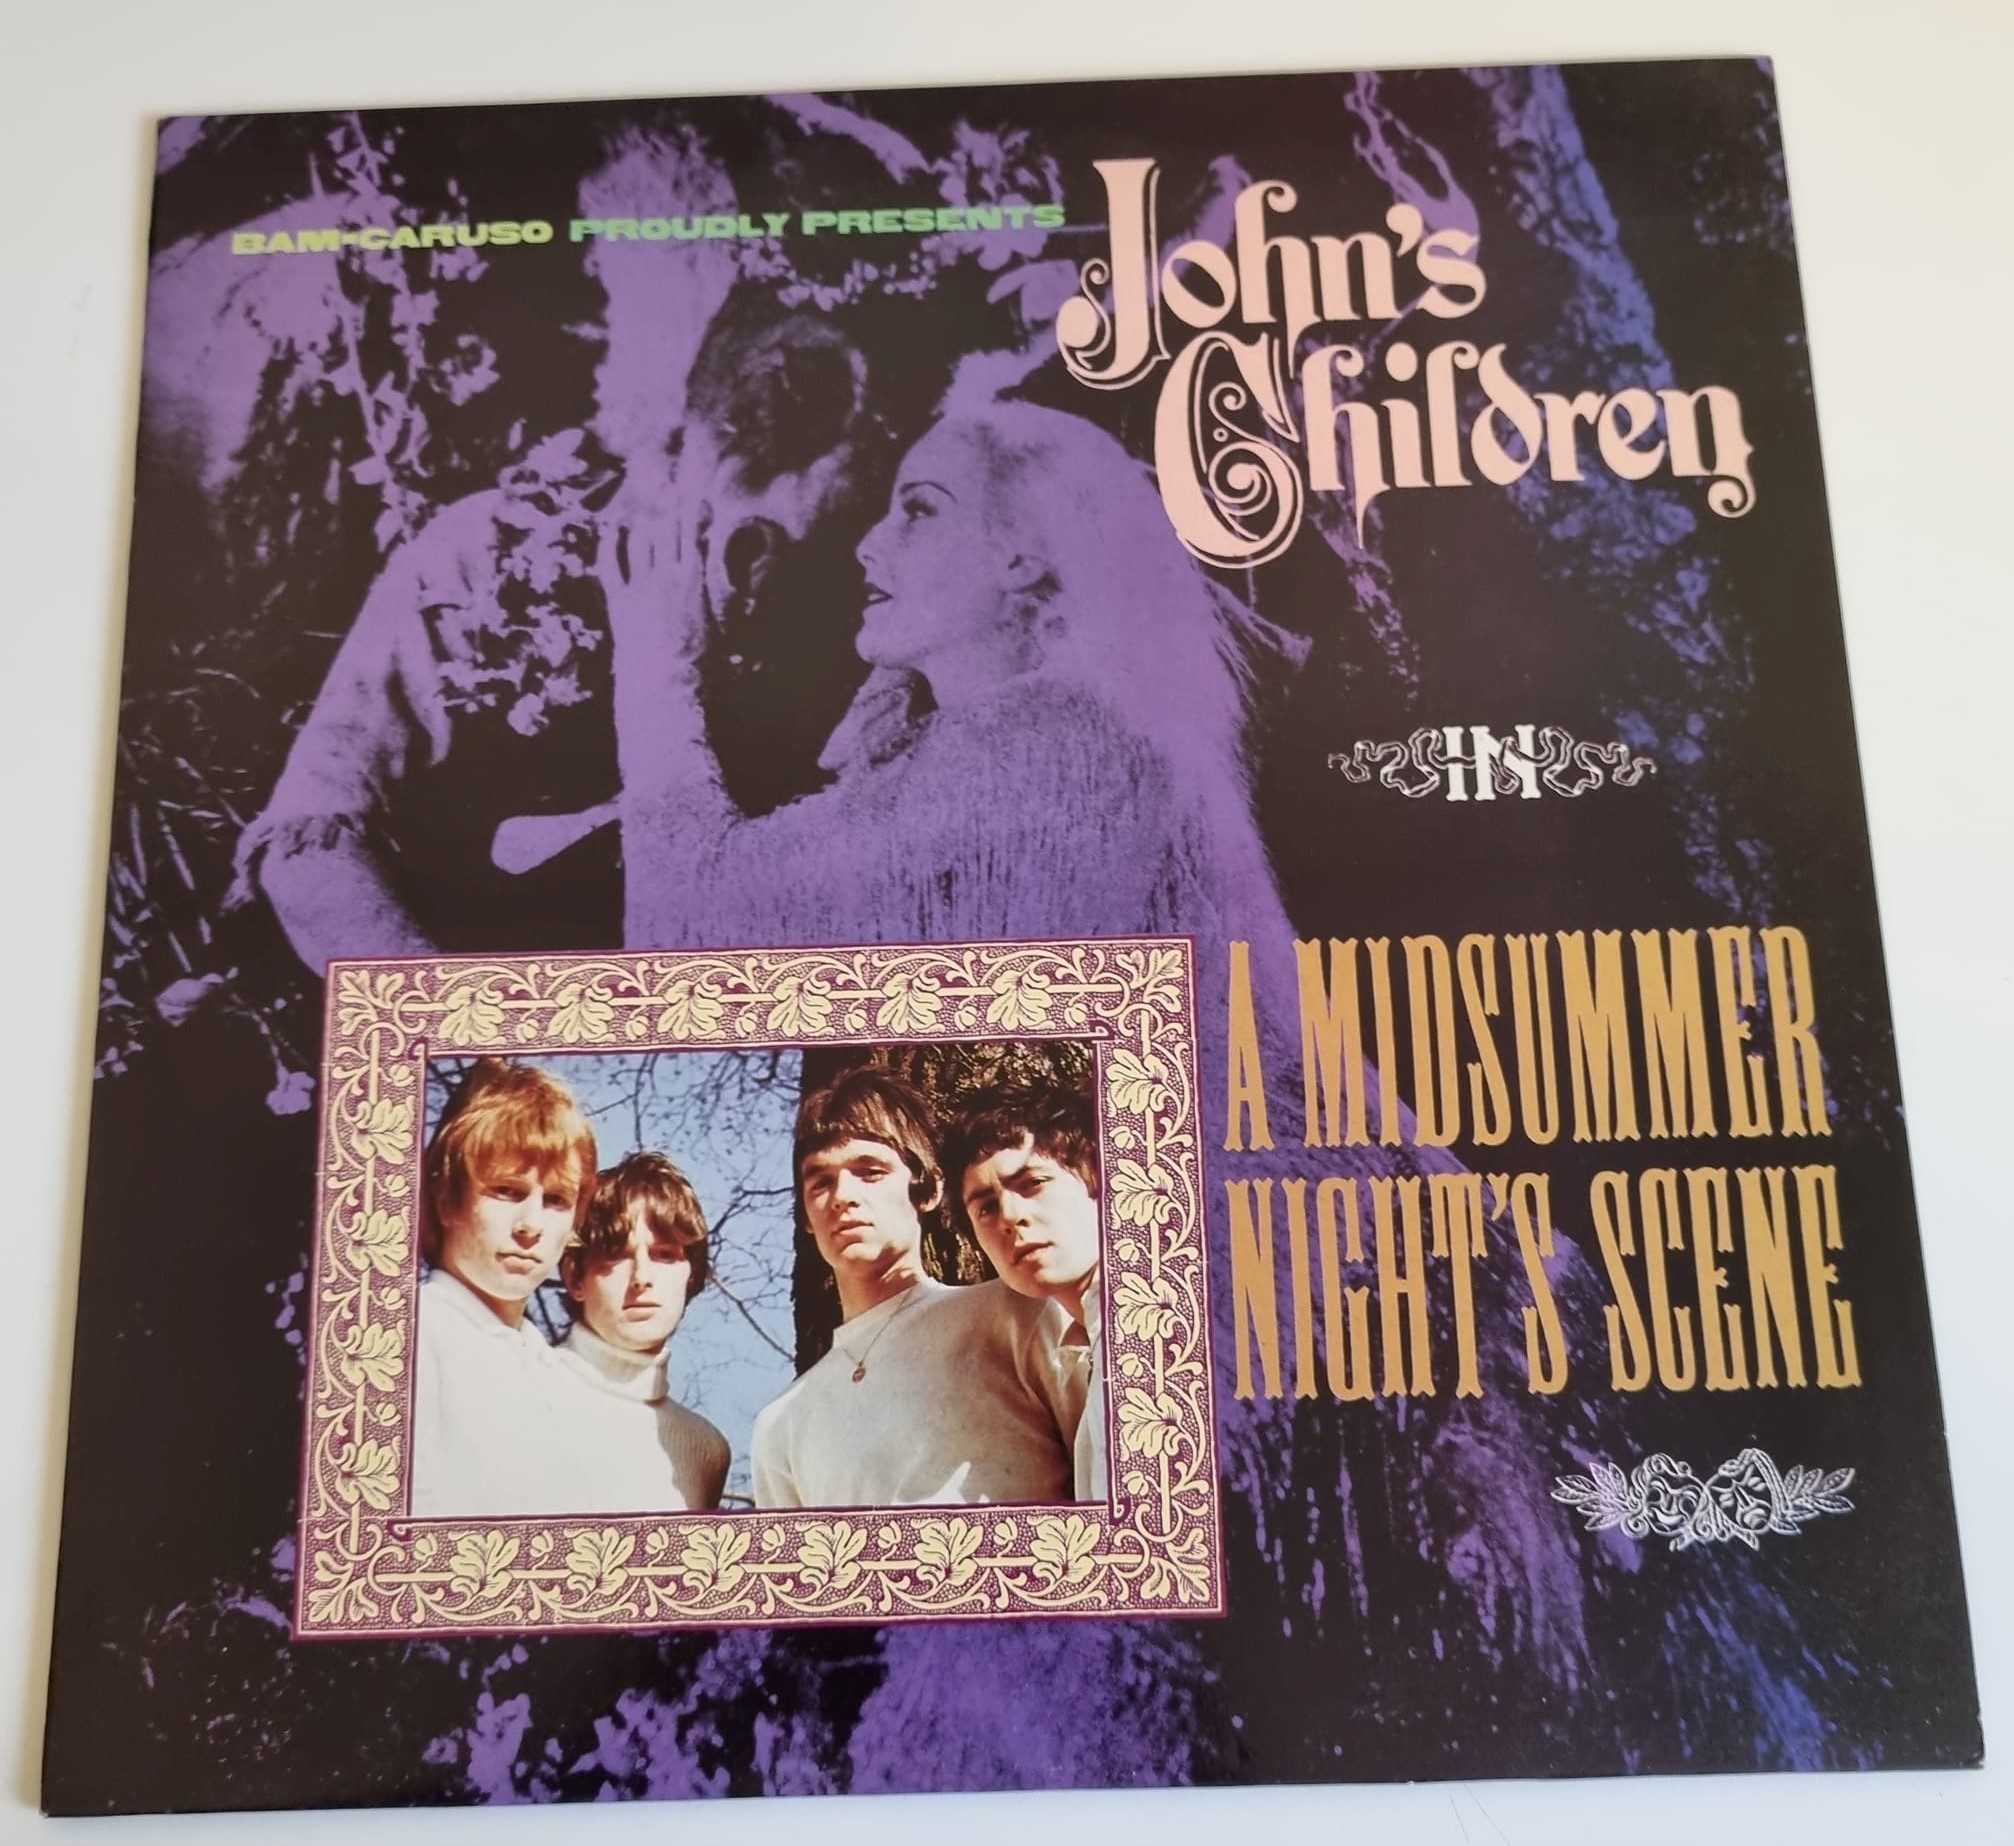 Buy this rare Johns Children record by clicking here